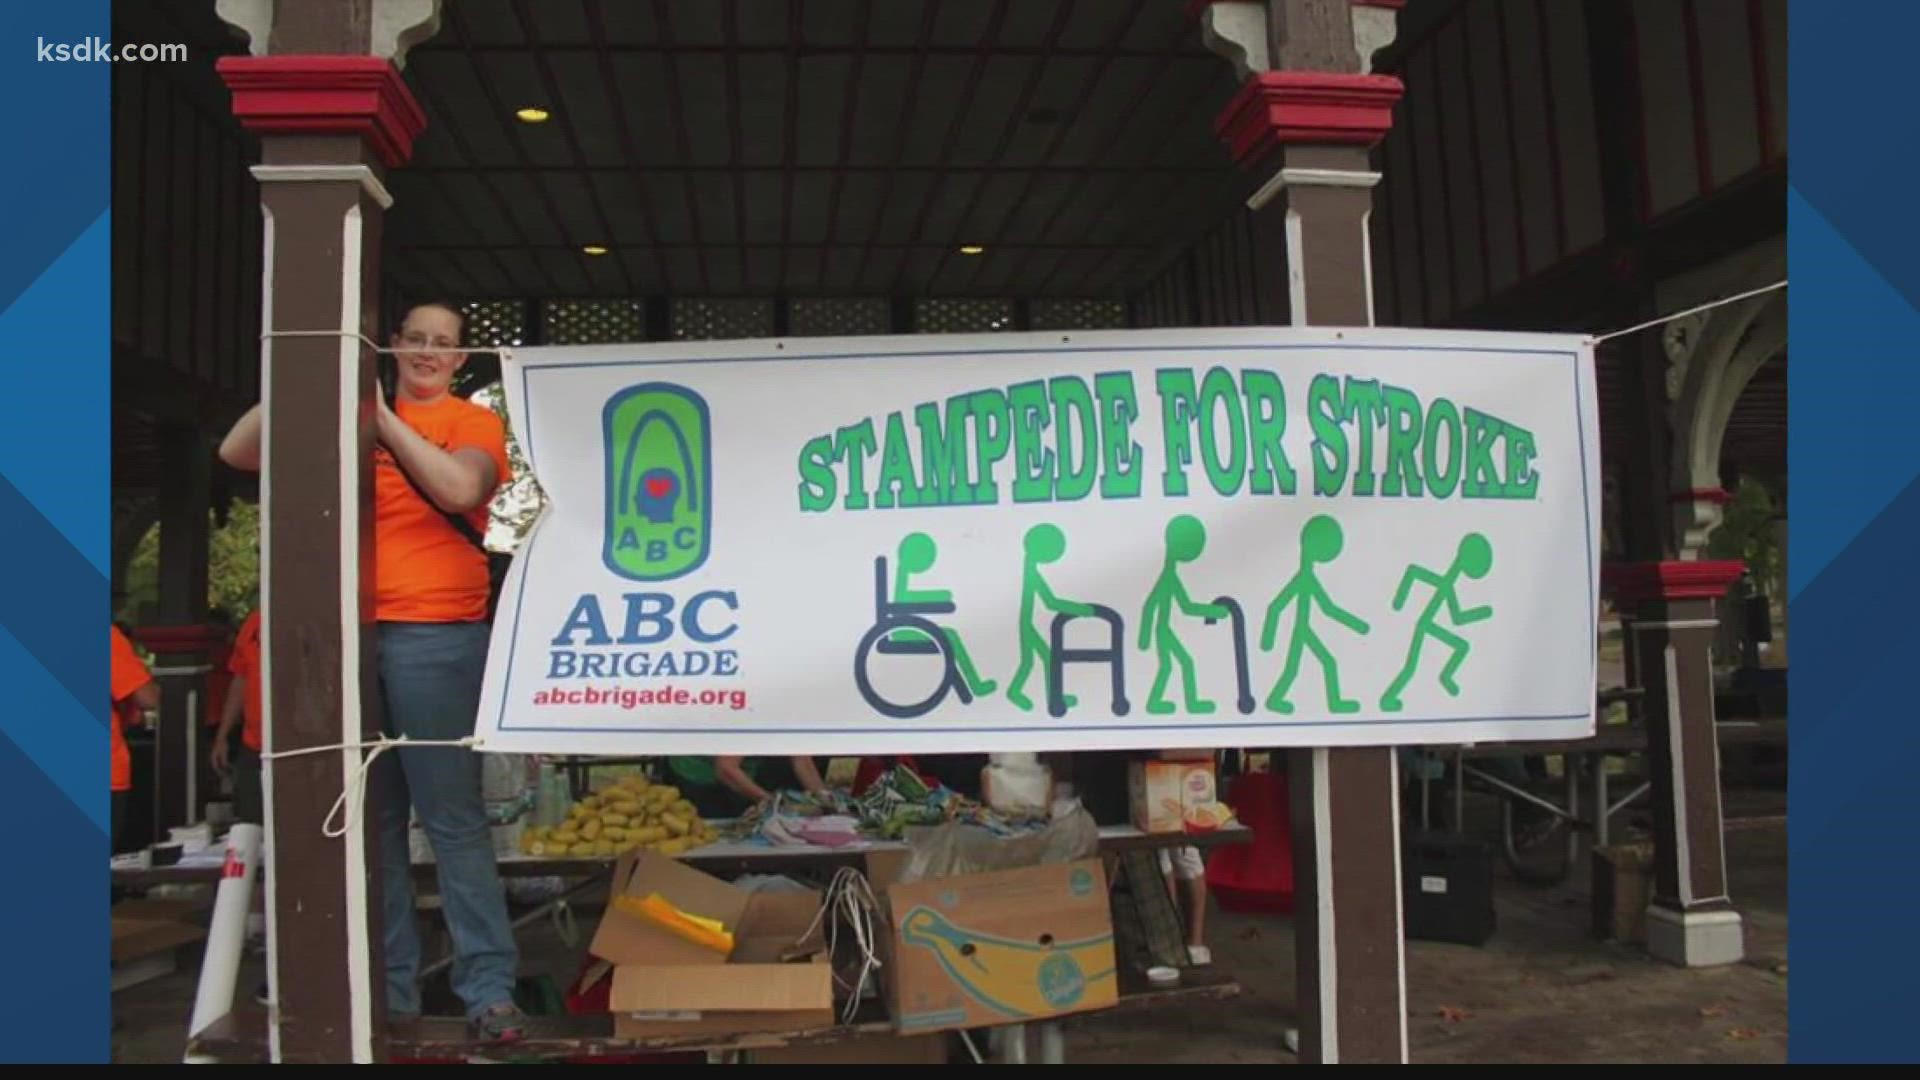 Survivors of stroke and their caregivers will be celebrated at the Stampede for Stroke this weekend, with a run/walk and support from the community